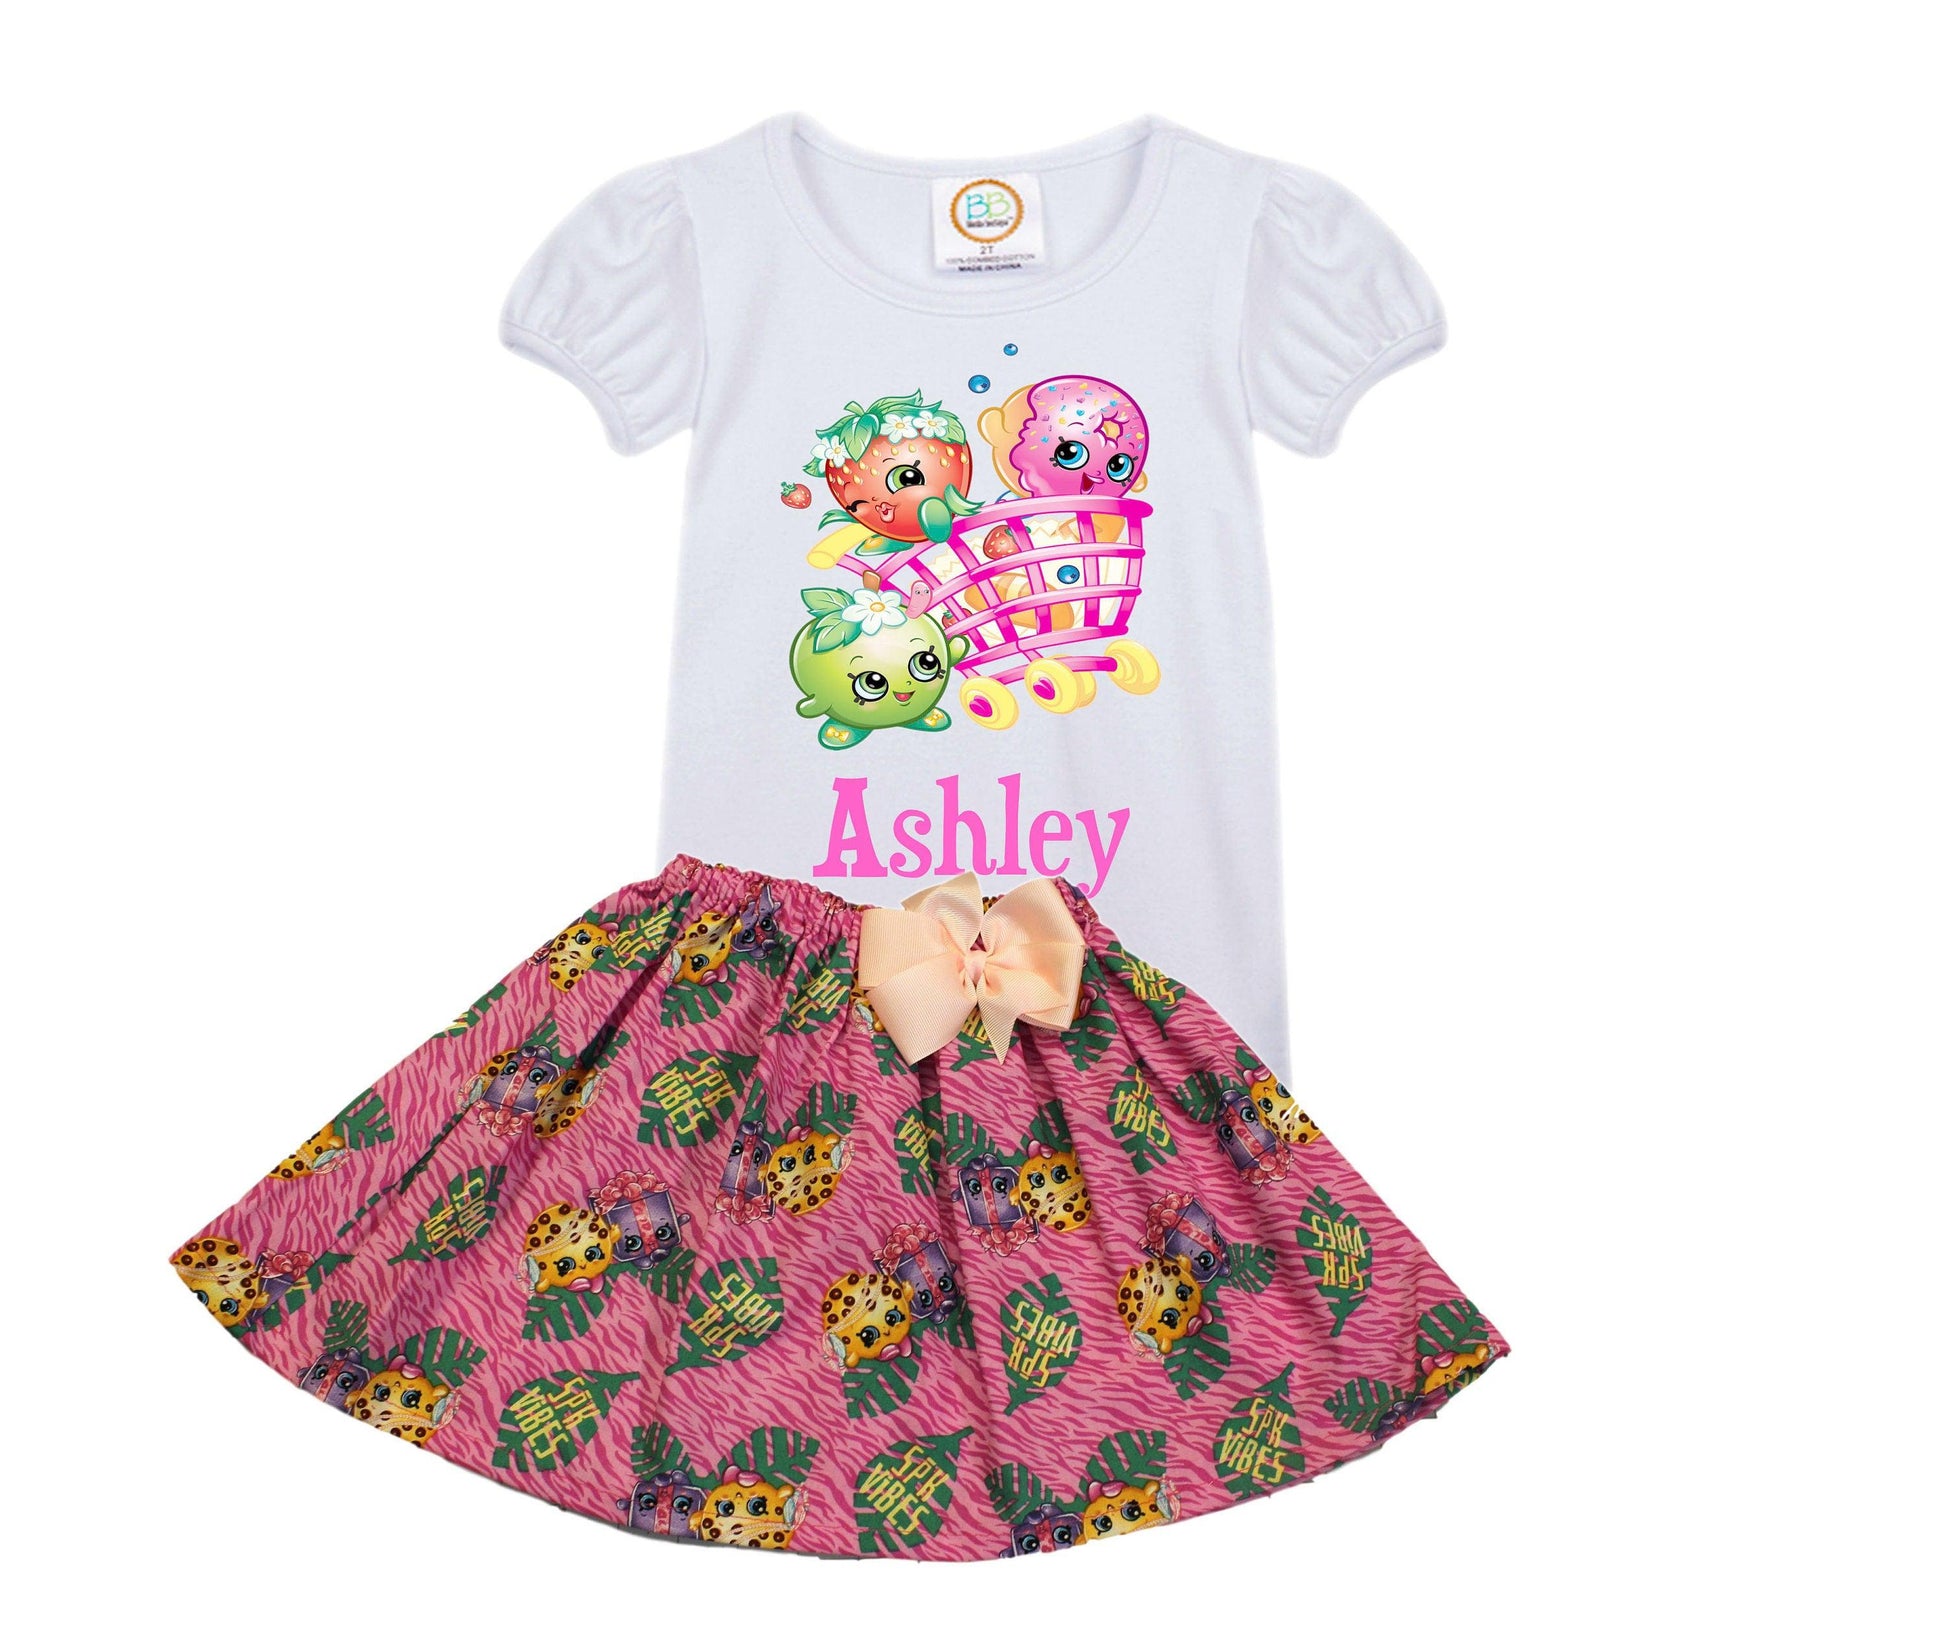 SHOPKINS BIRTHDAY OUTFIT